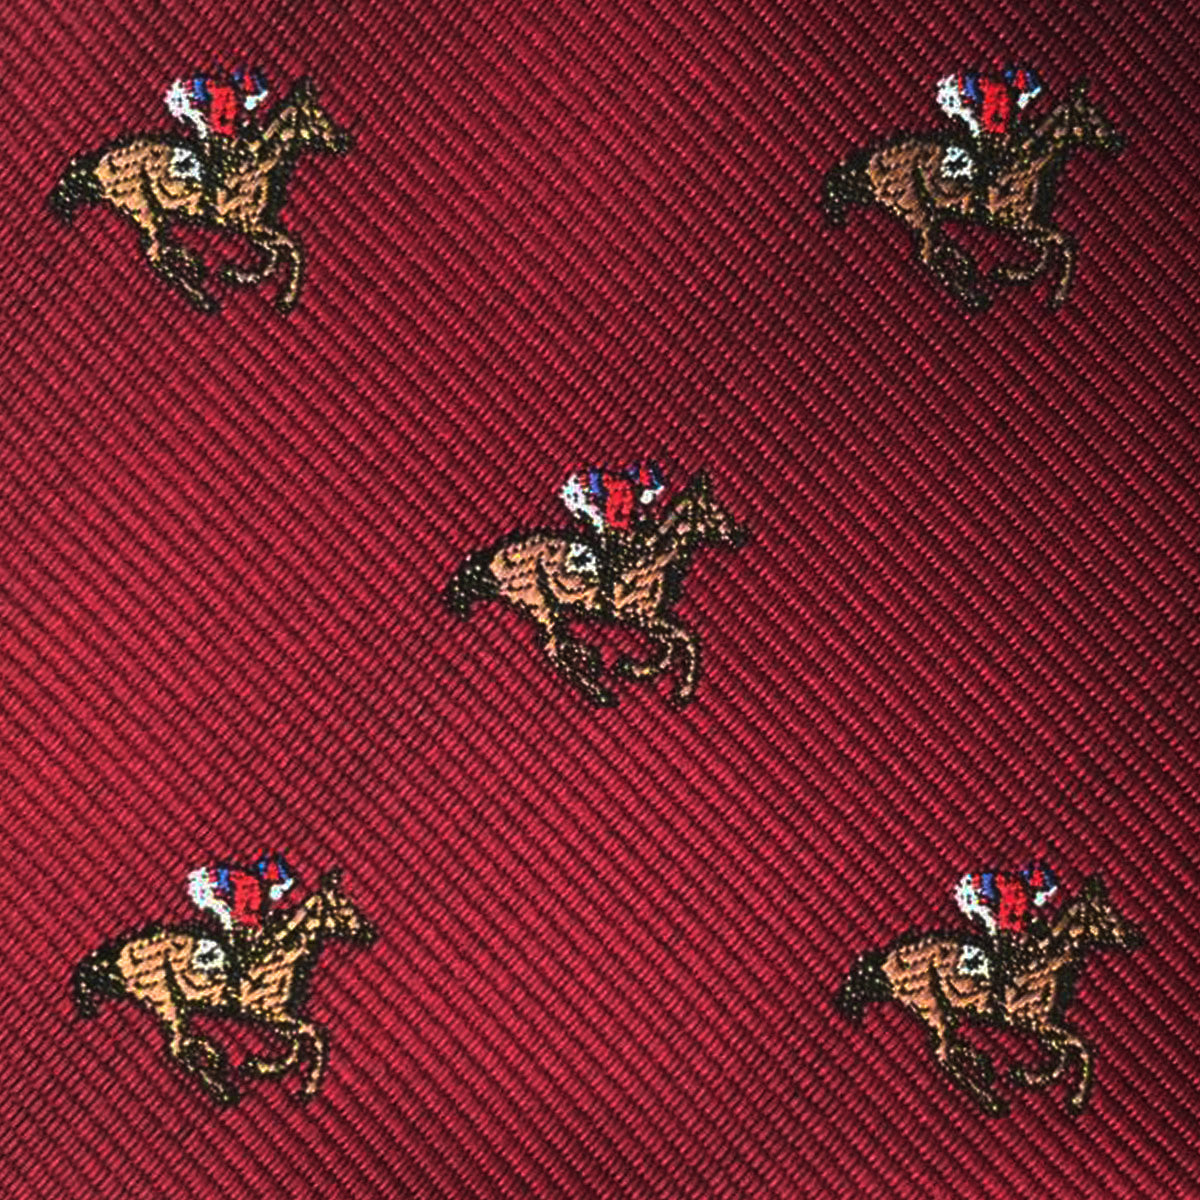 The Royal Ascot Racehorse Pocket Square Fabric